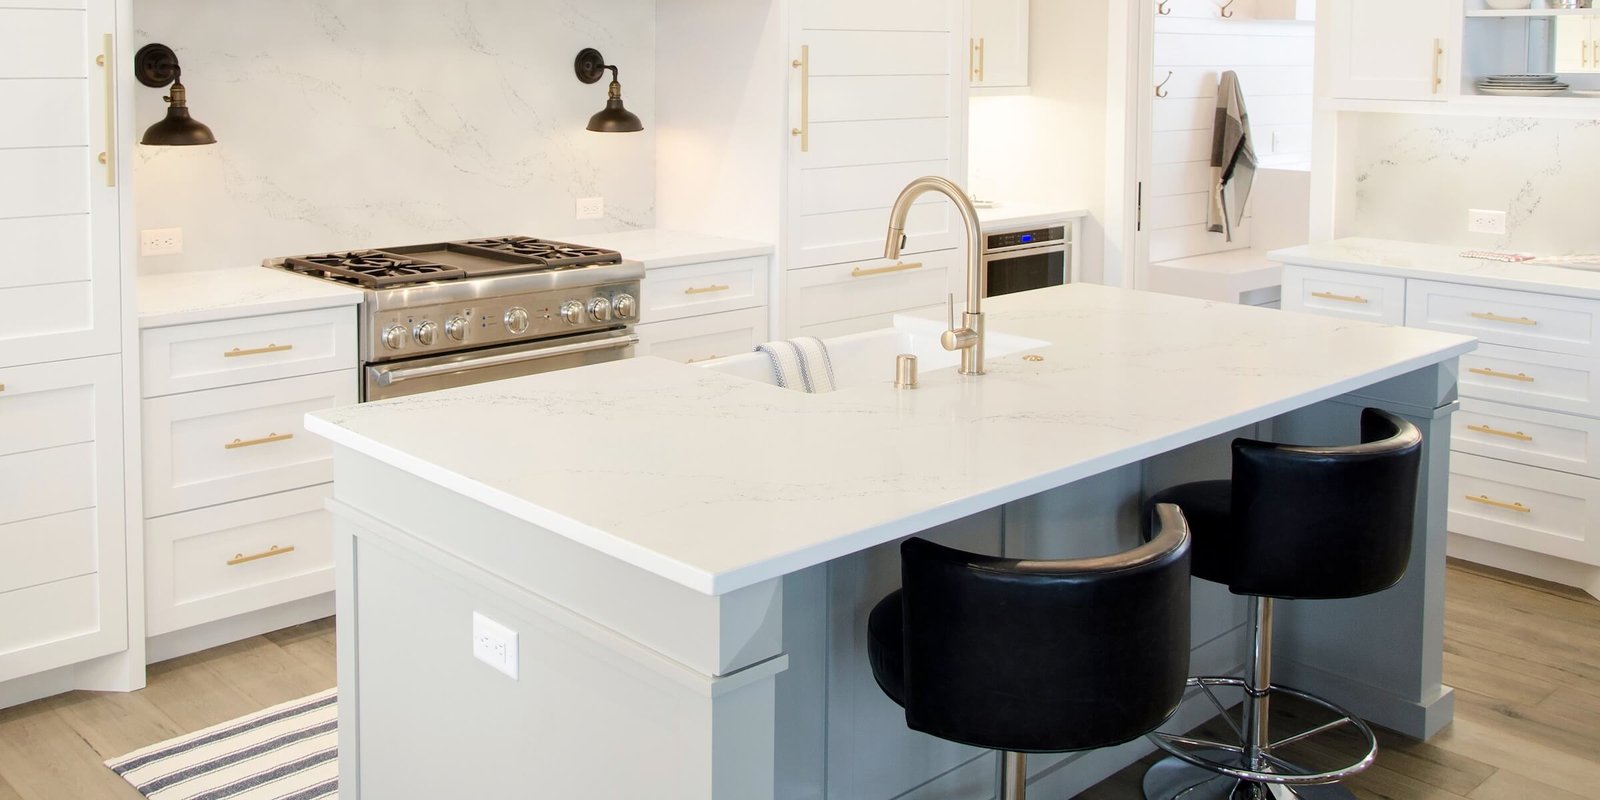 Why is Quartz Counter Better to Choose for Your Kitchen?